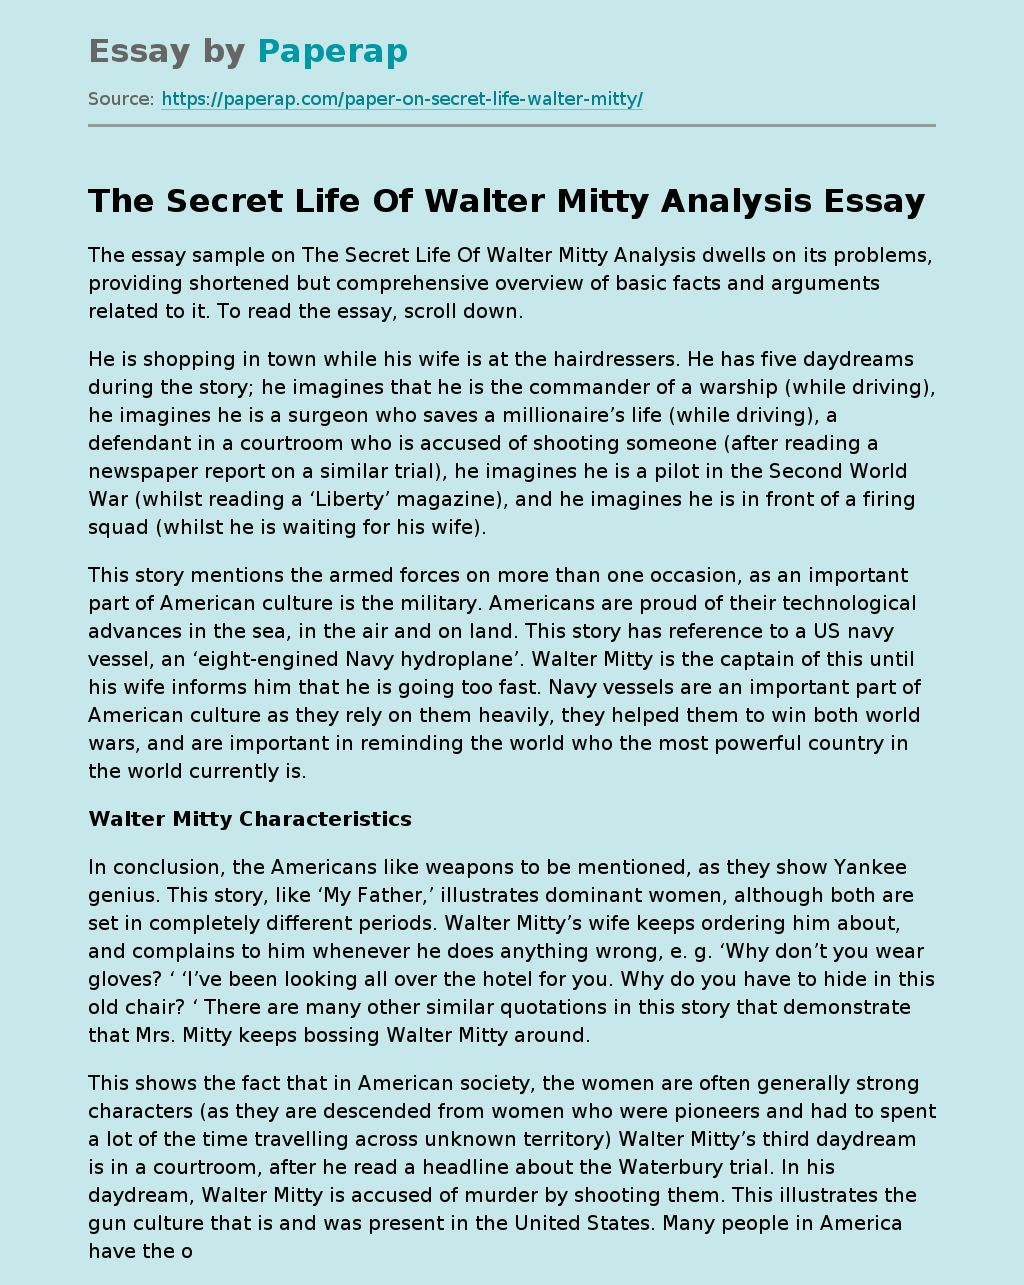 The Secret Life Of Walter Mitty Analysis